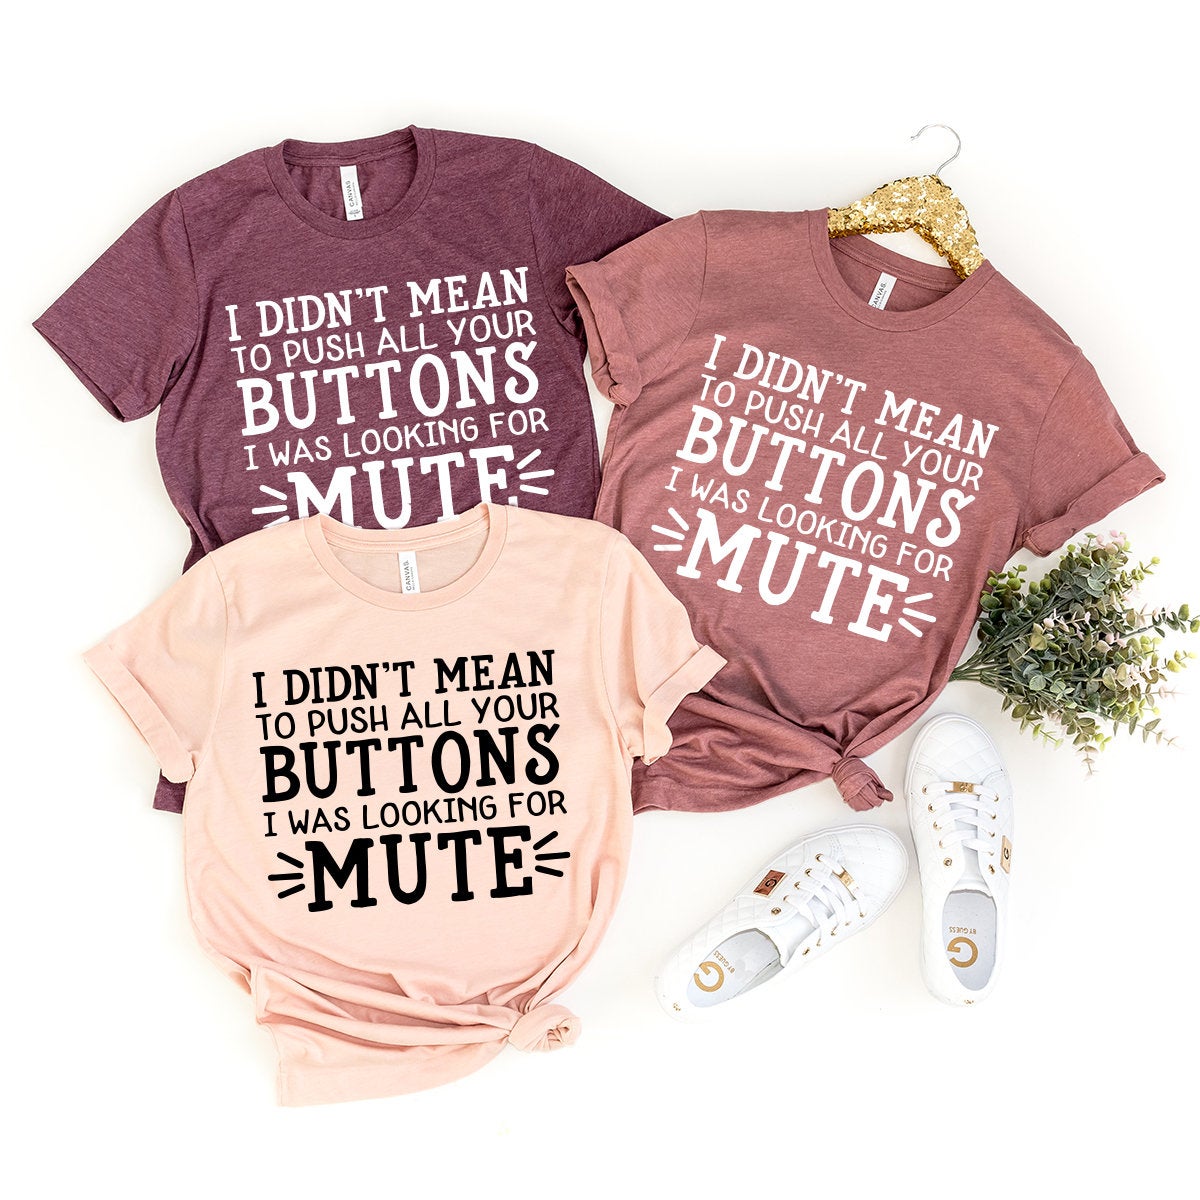 Sassy Quotes Shirt, Funny Adult Shirt, Humor T-Shirt, Funny Sarcastic Shirt, I Didn't Mean To Push All Buttons I Was Looking For Mute Shirt - Fastdeliverytees.com